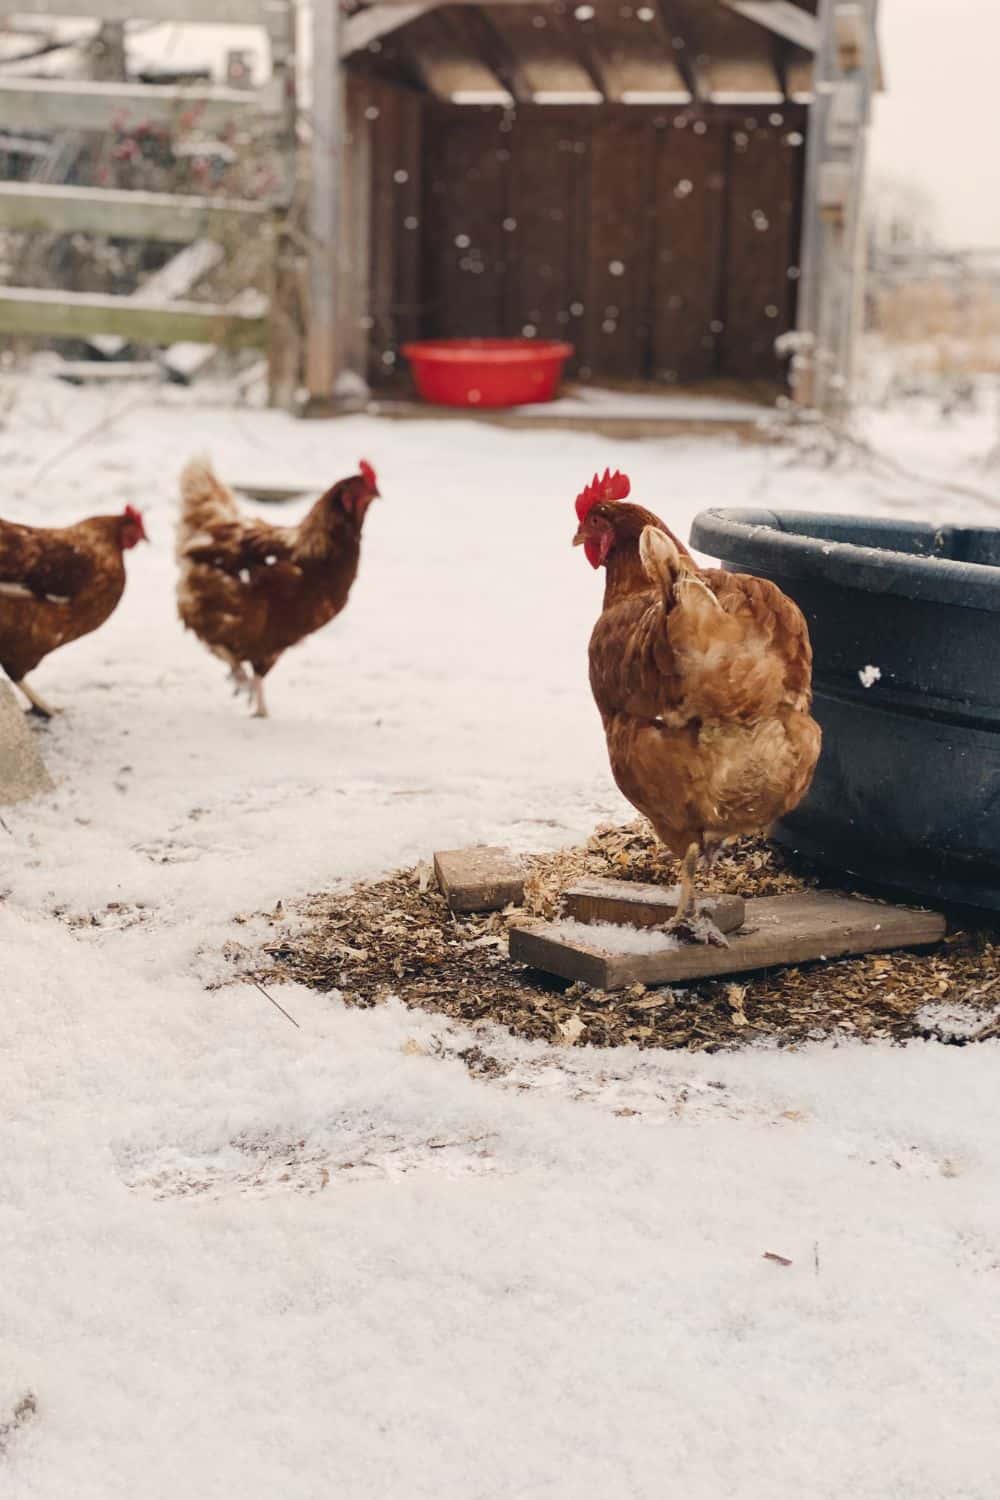 How to tell if chickens are too cold